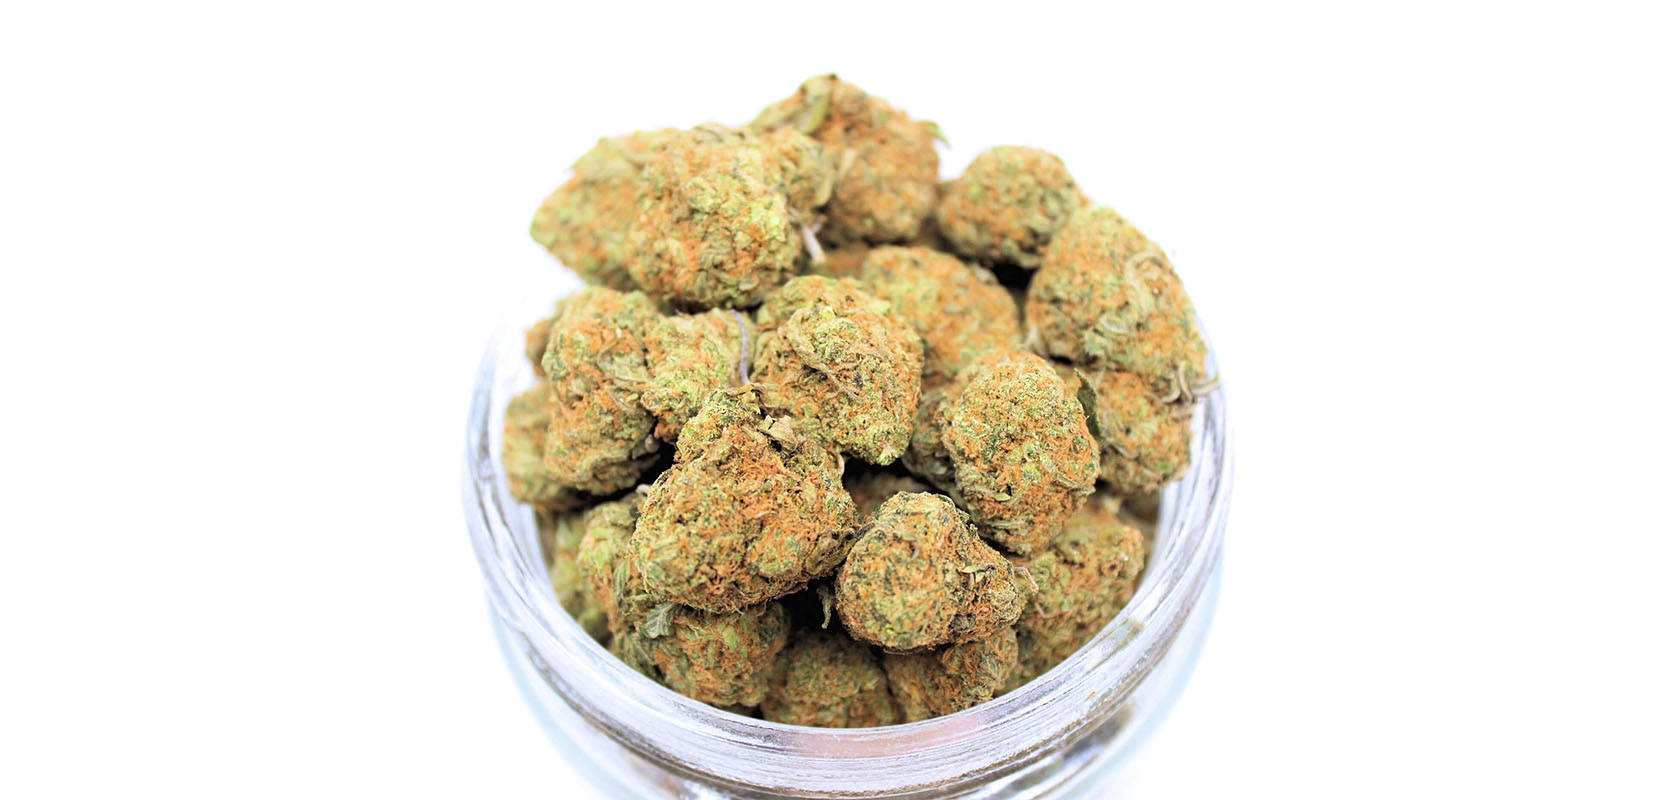 Orange Crush weed online Canada at wccannabis weed store and online dispensary Canada. Value buds and mail order marijuana Canada. buy weed online.